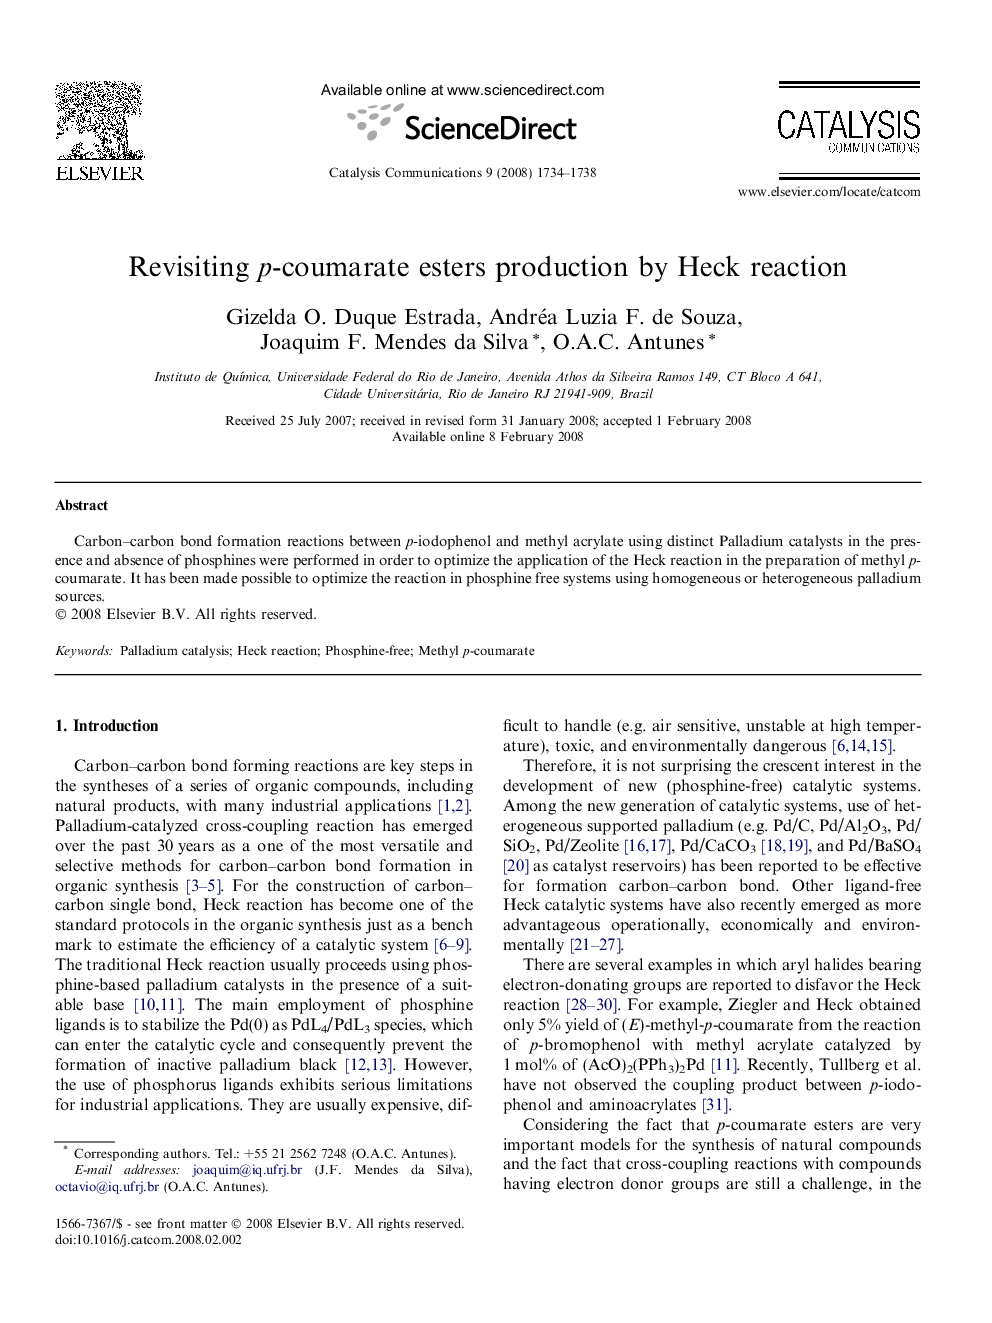 Revisiting p-coumarate esters production by Heck reaction